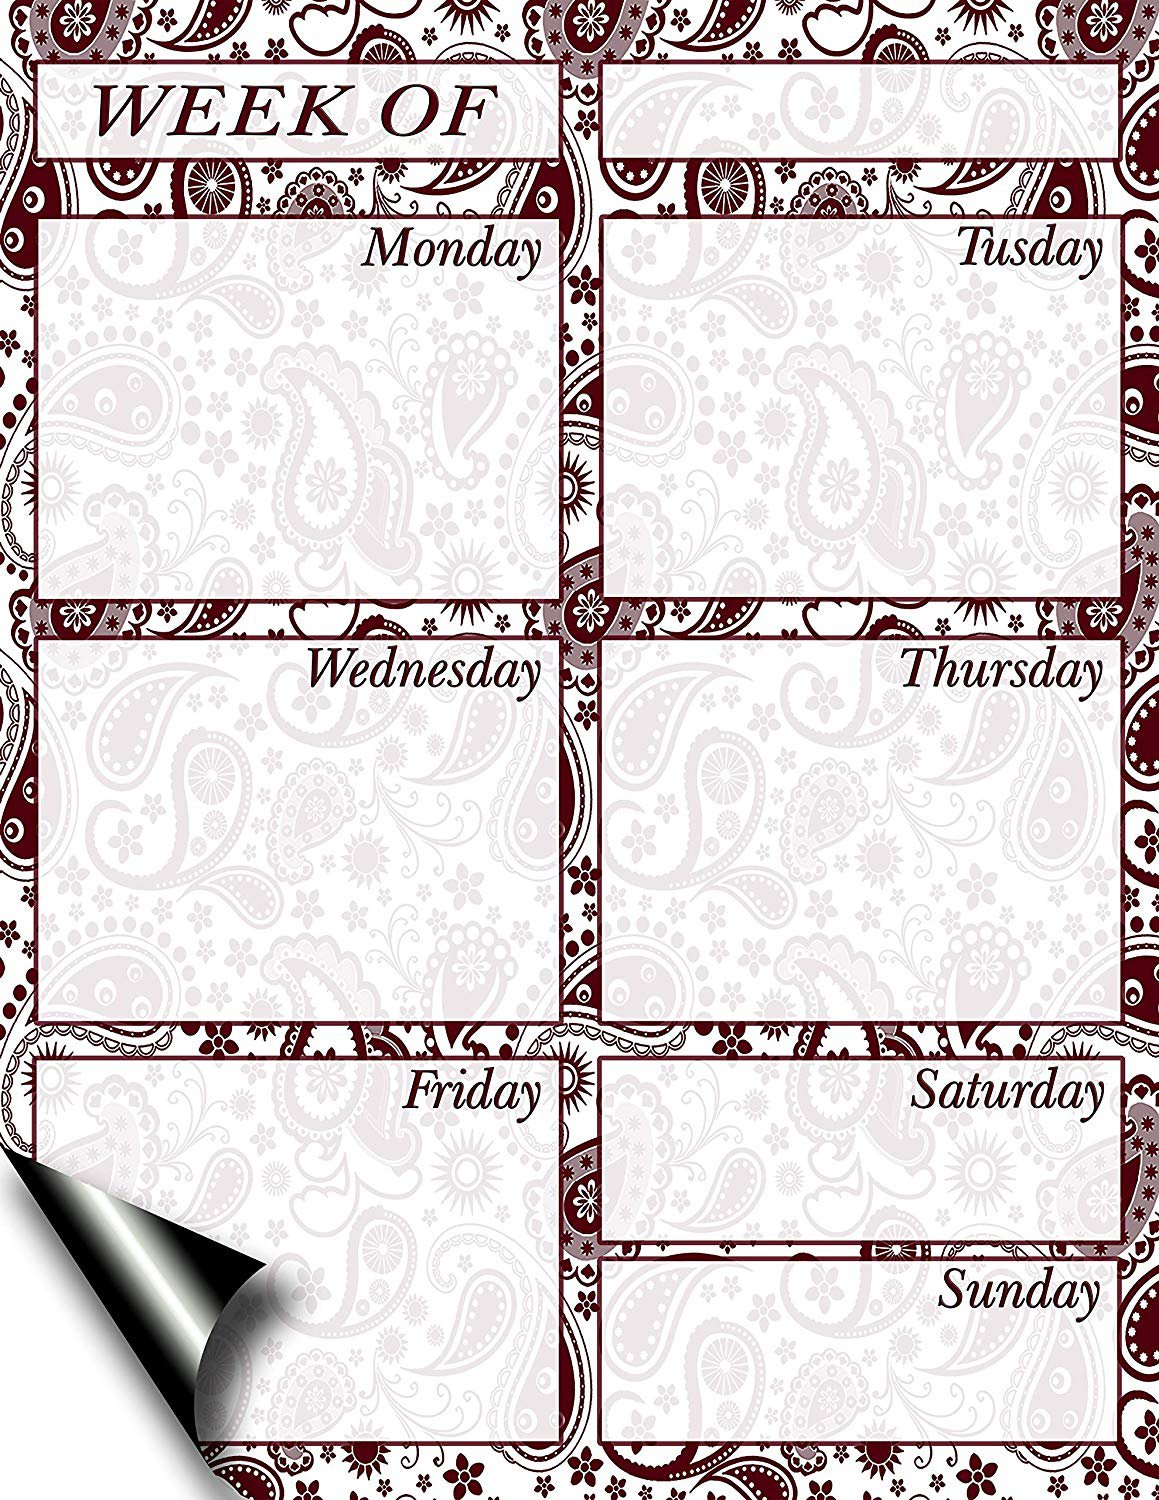 Chore Chart Weekly Planner To Do List Message Board Edition 11